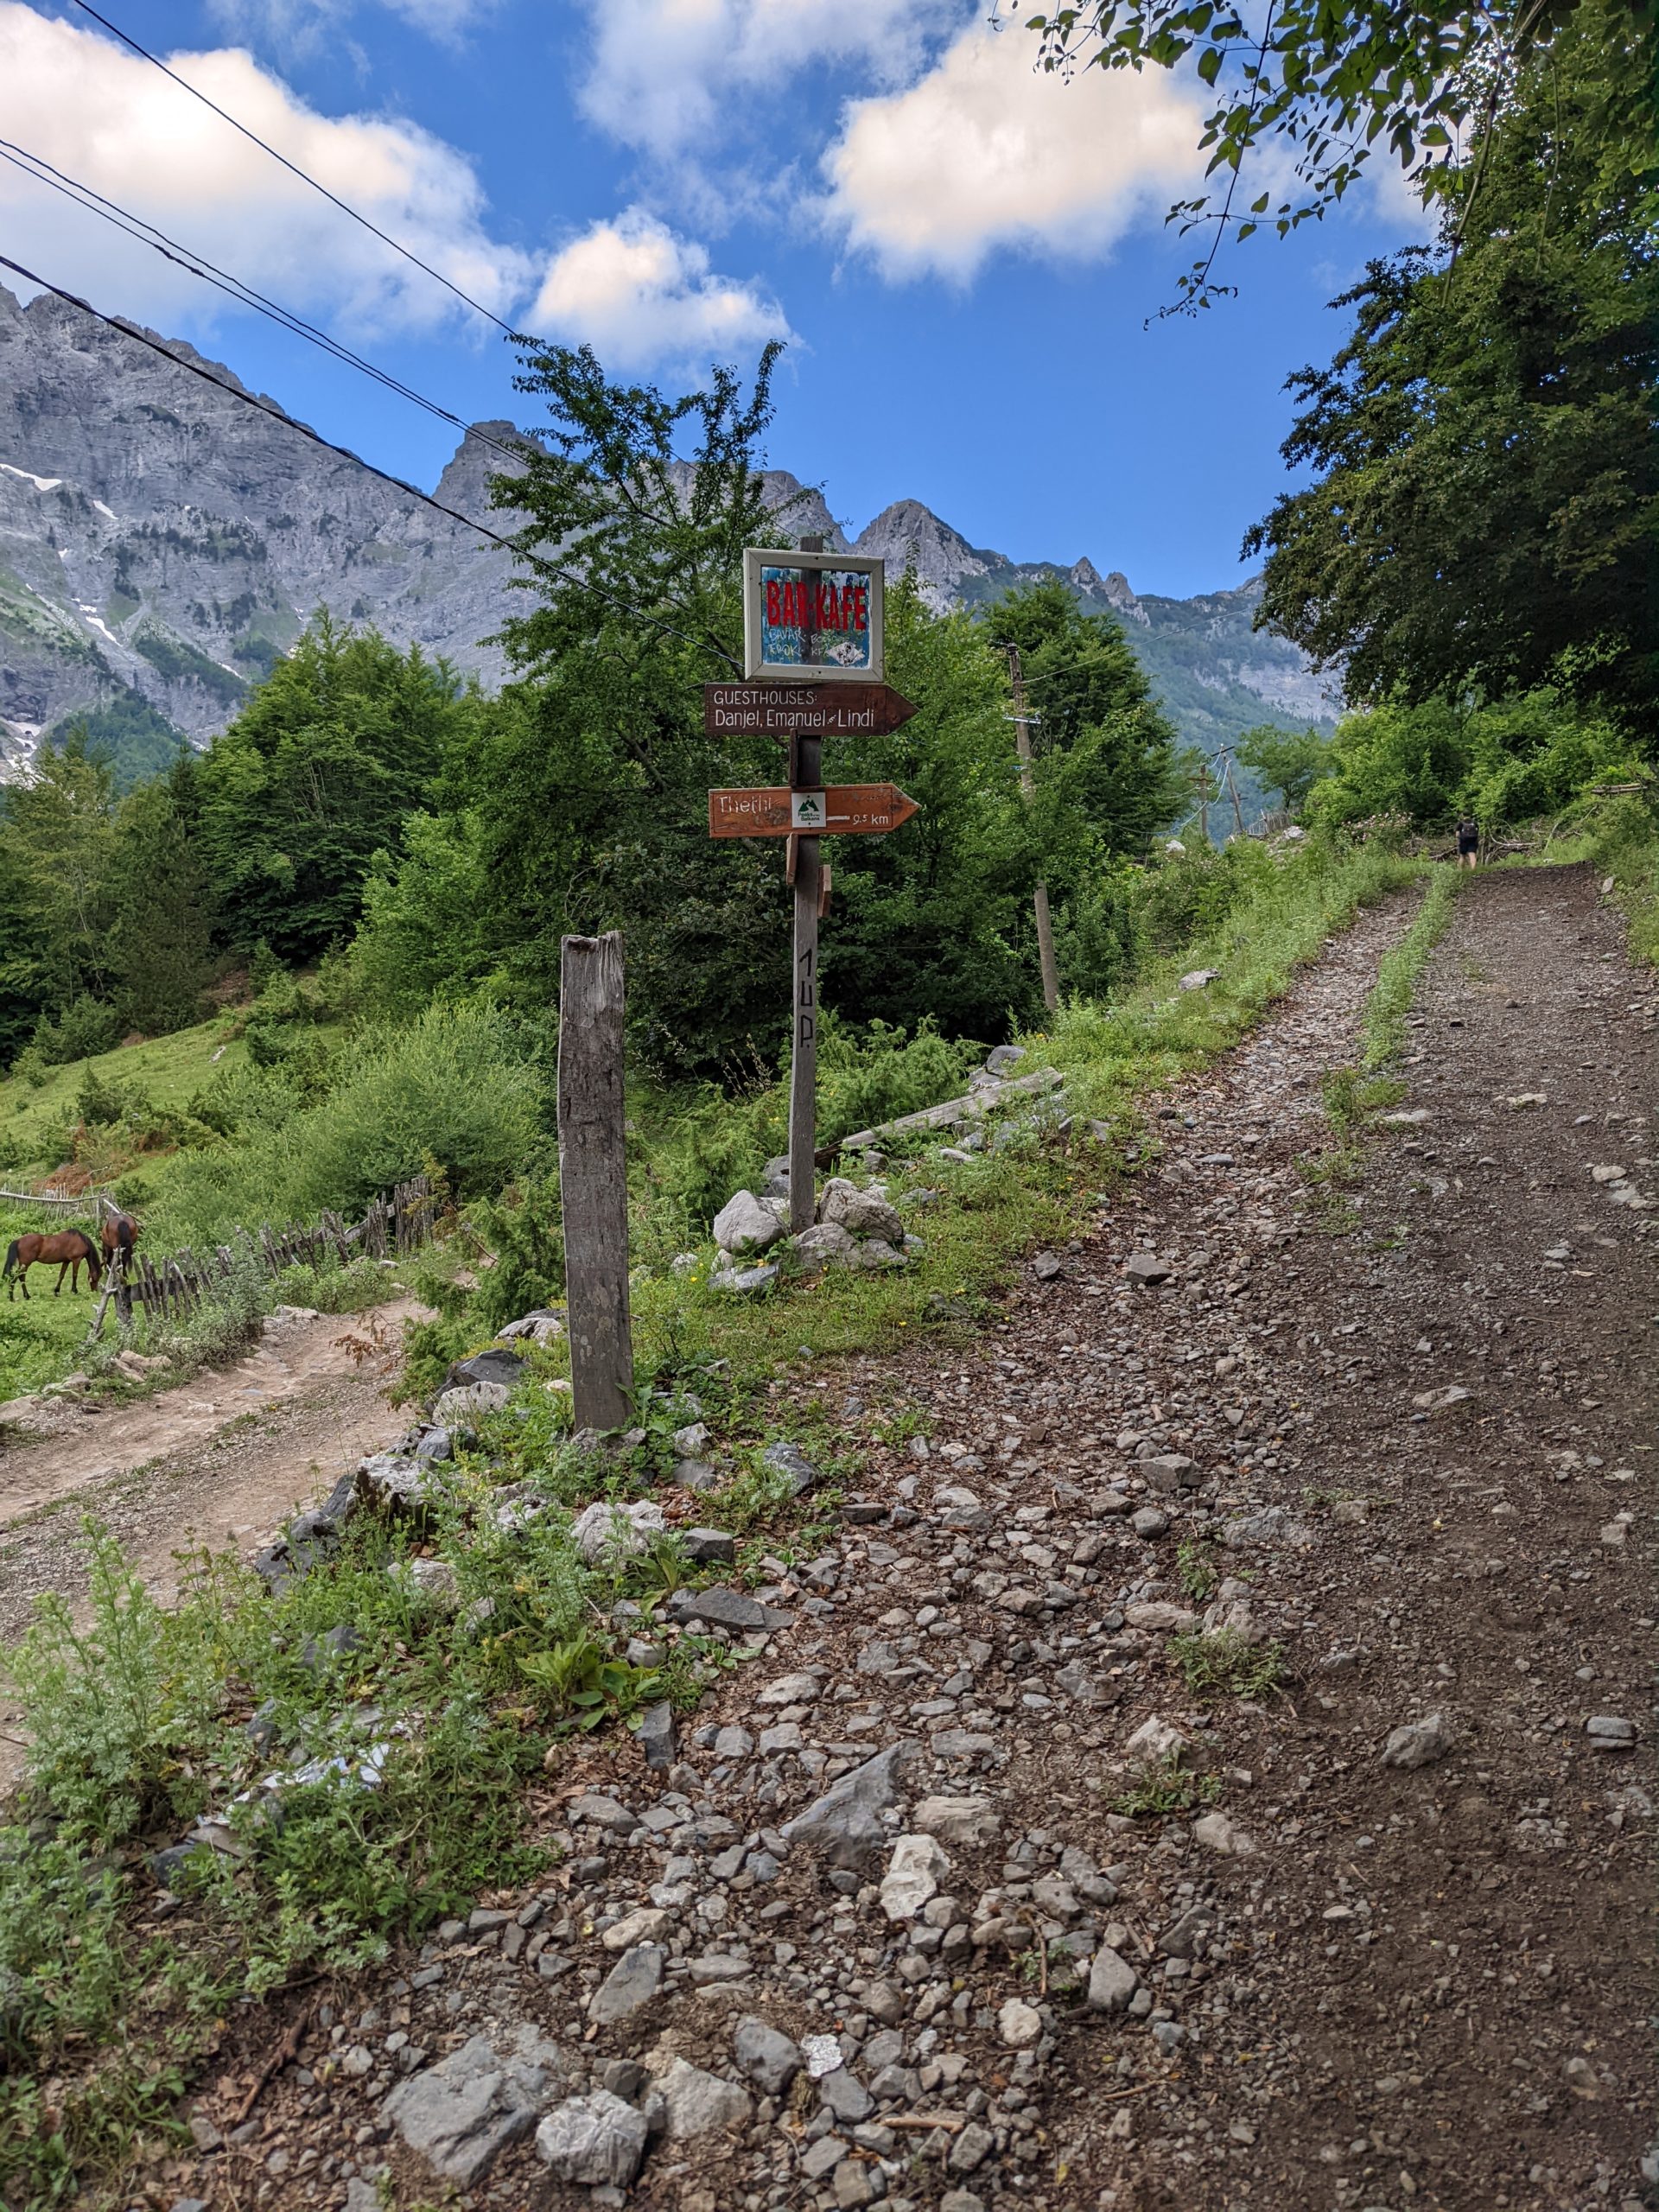 signs showing the hiking route